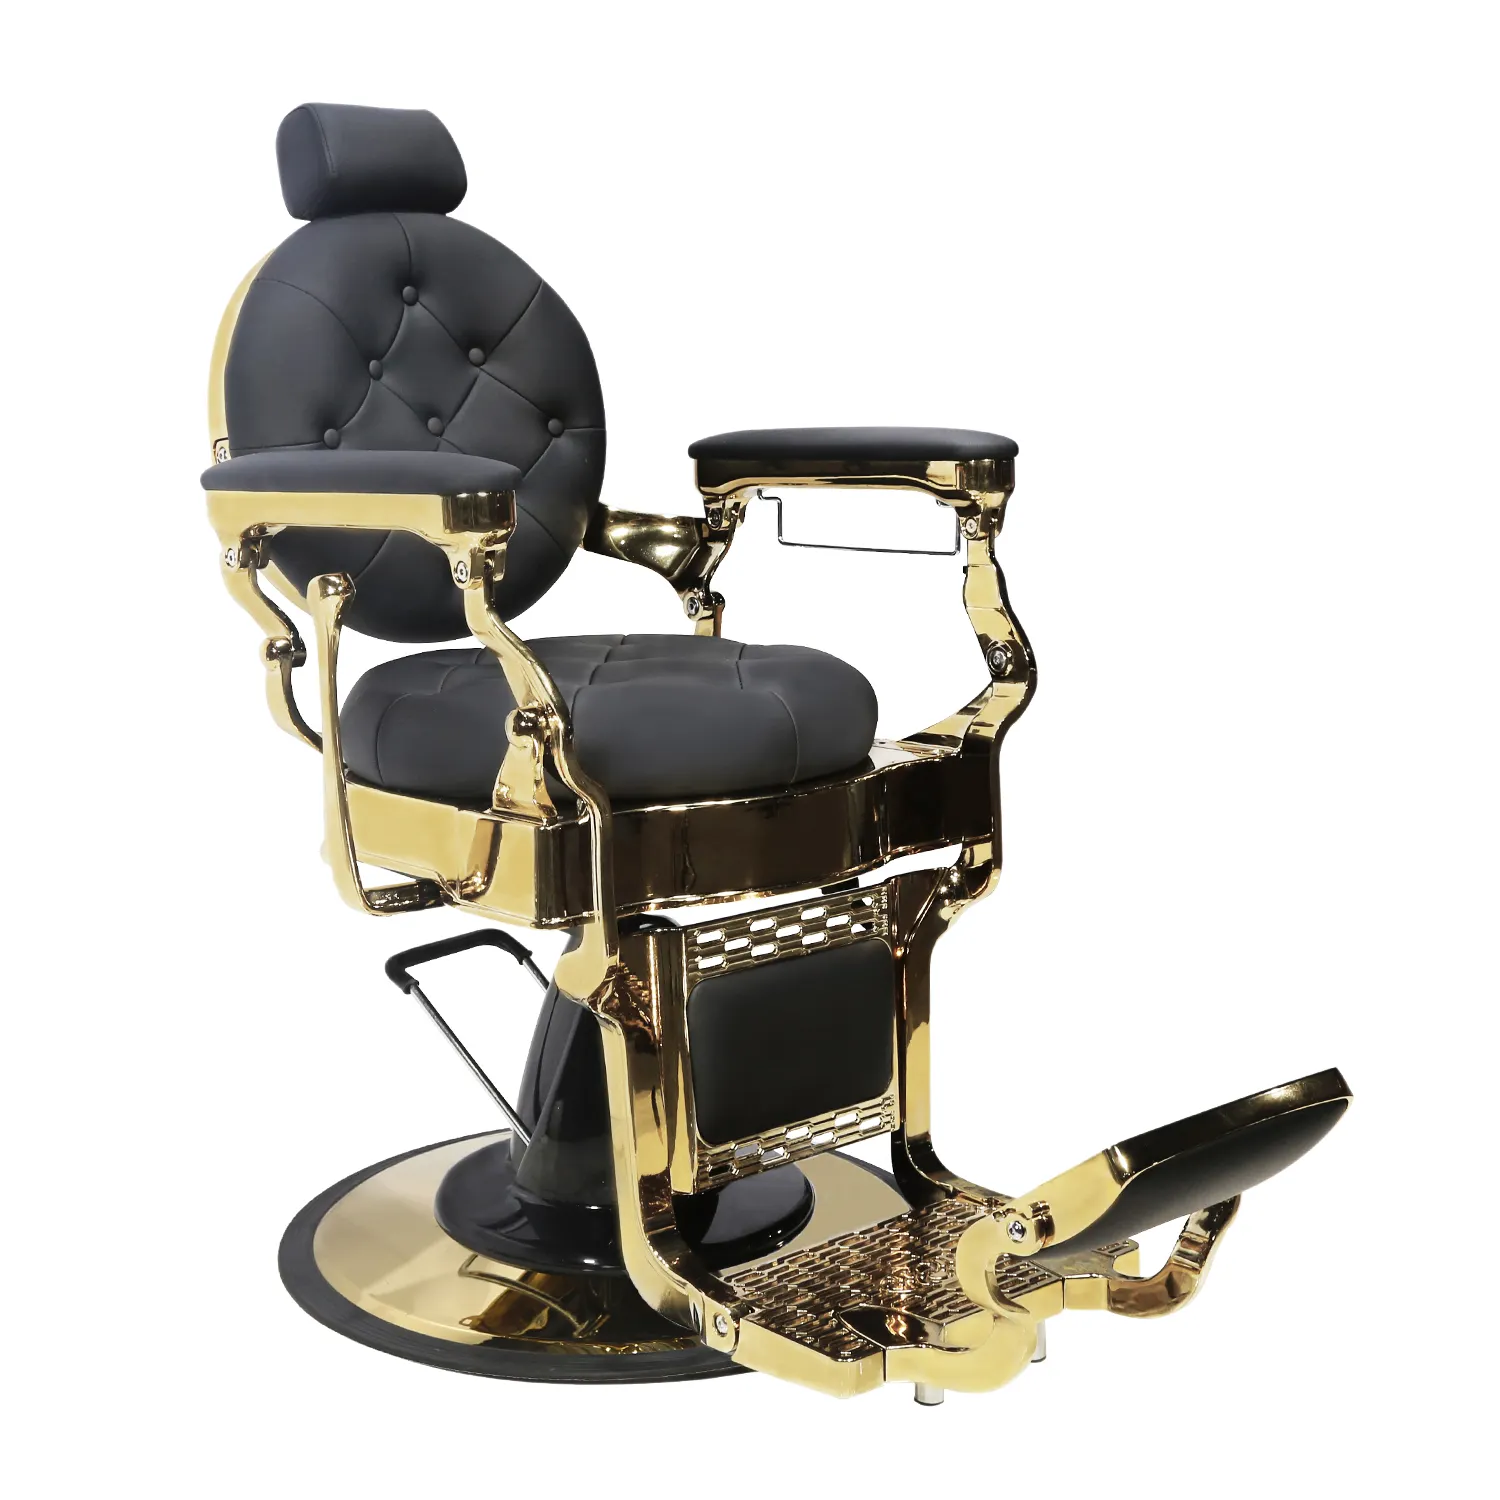 DTY premium custom sillas golden vintage barber chair shop salon red and gold old fashioned